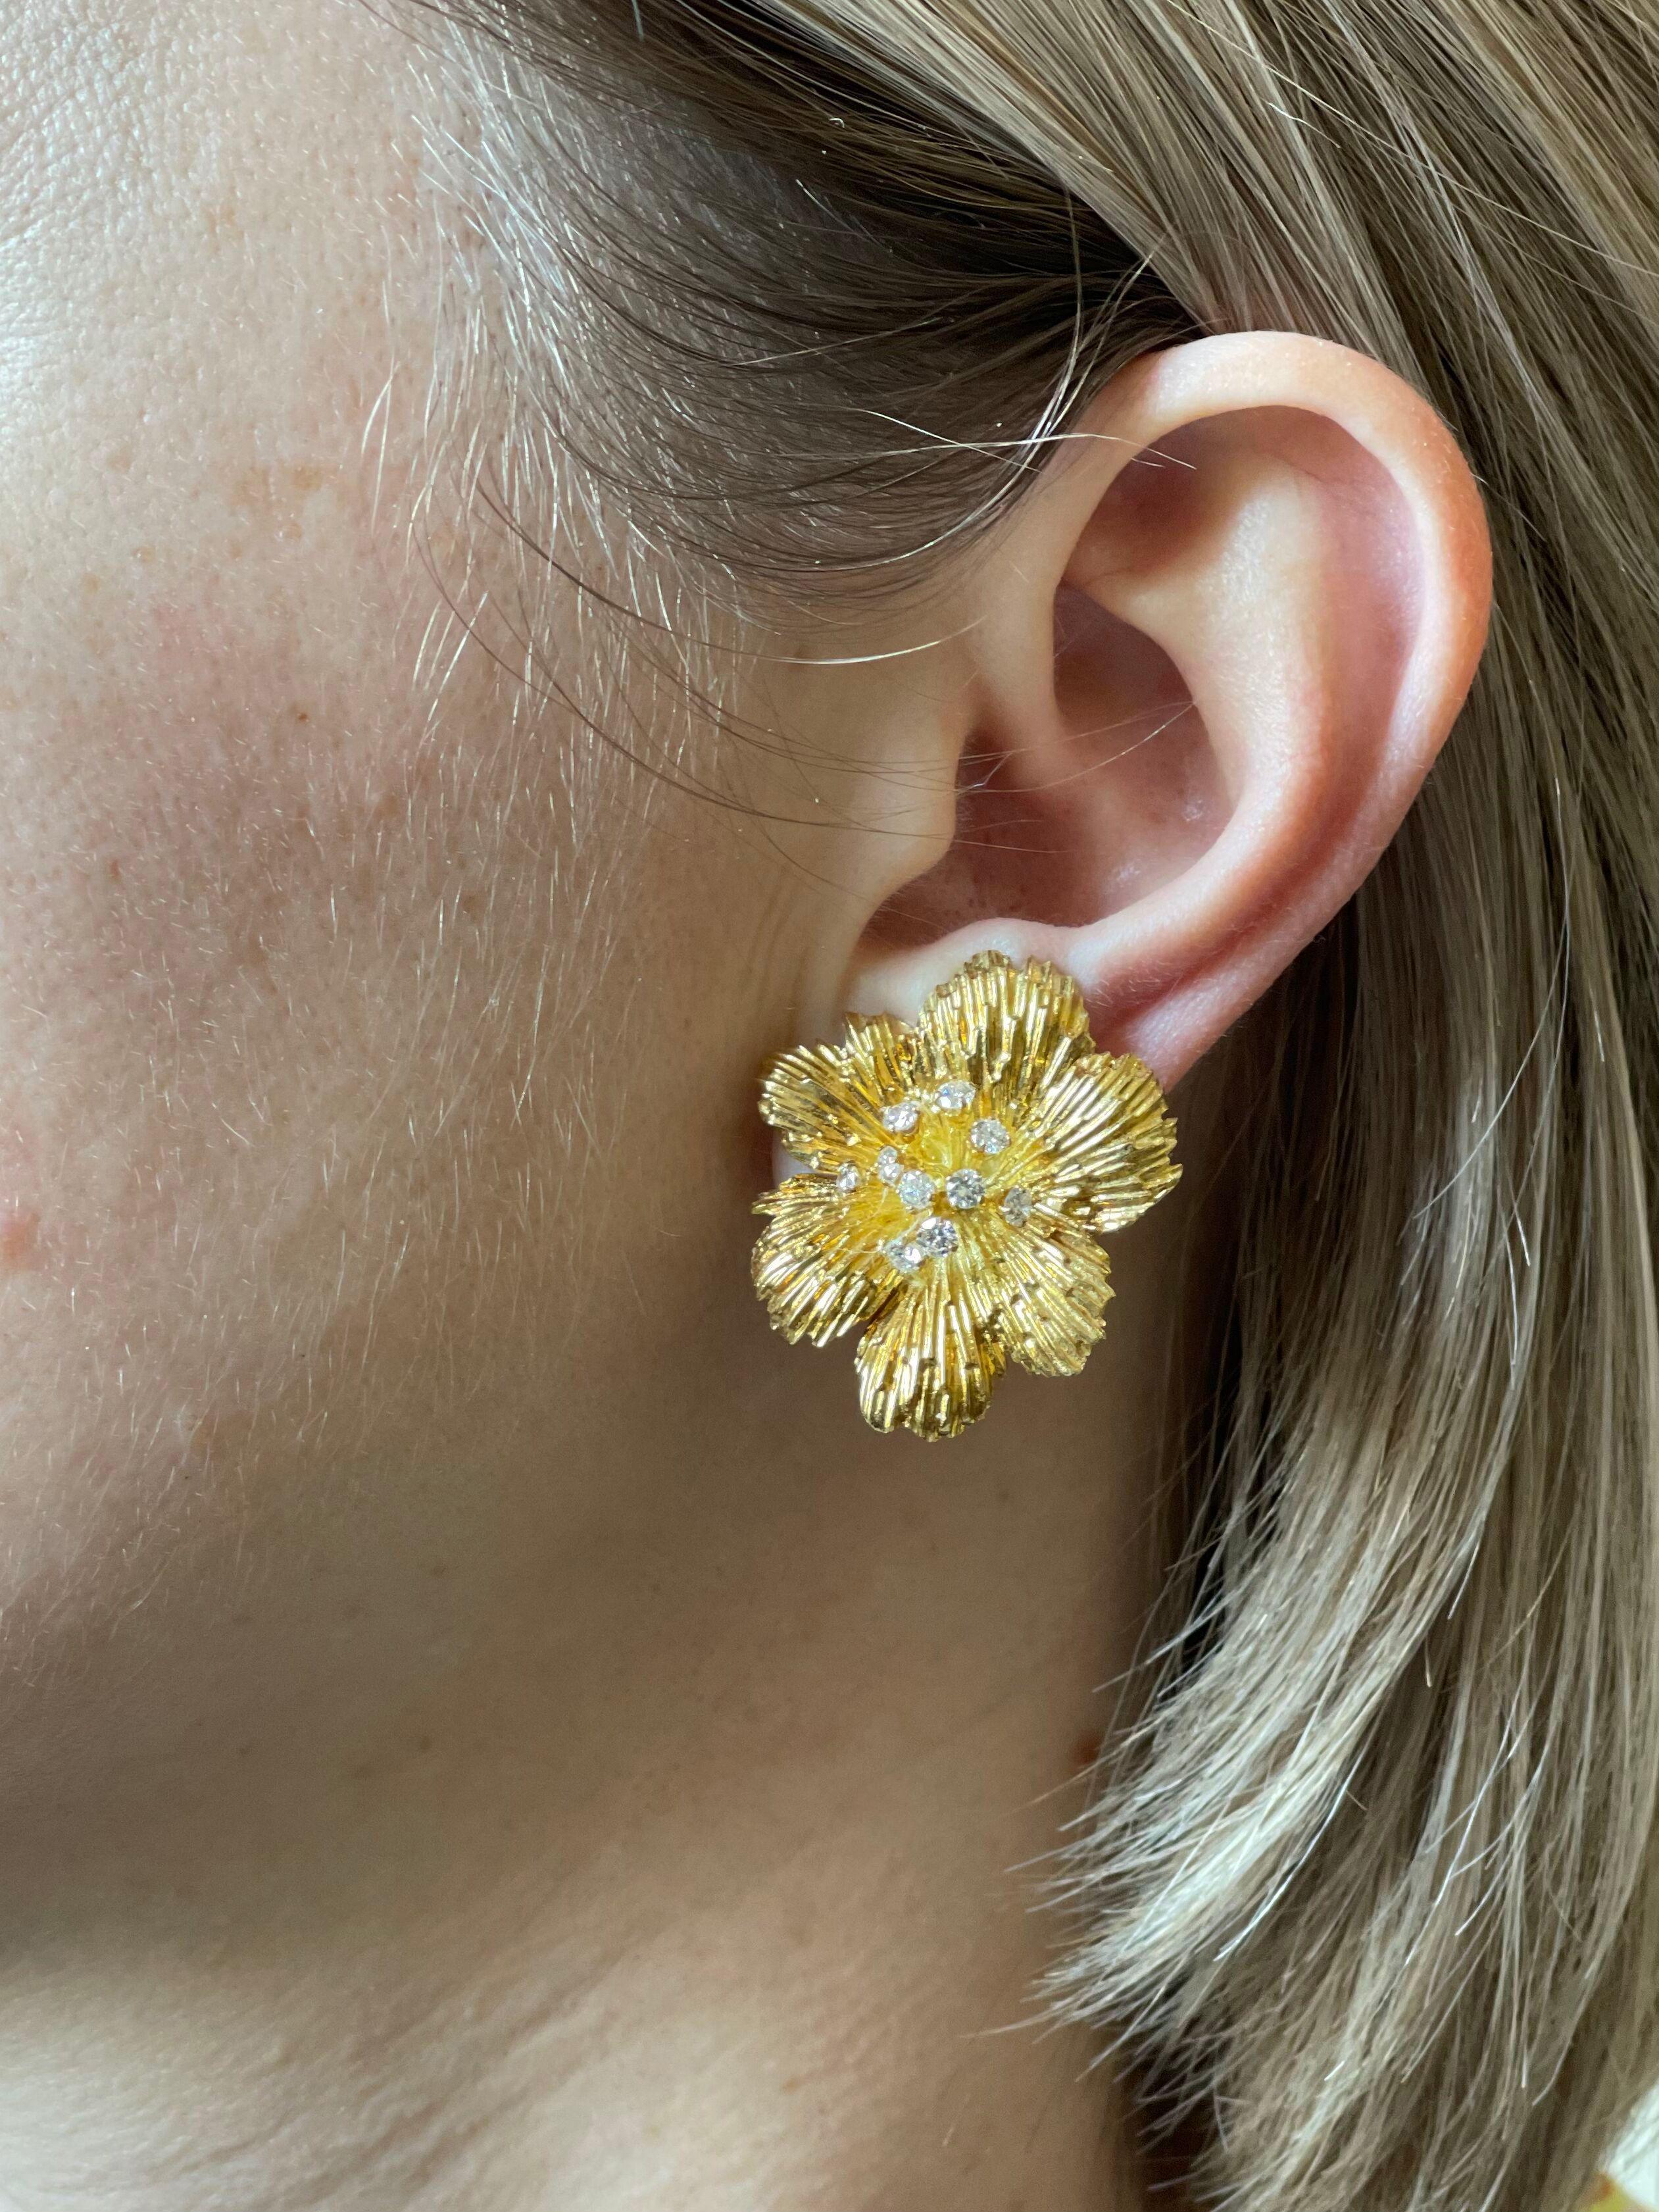 Pair of 18k gold flower earrings, with approx. 0.80ctw H/Si diamonds. Earrings measure 1.25